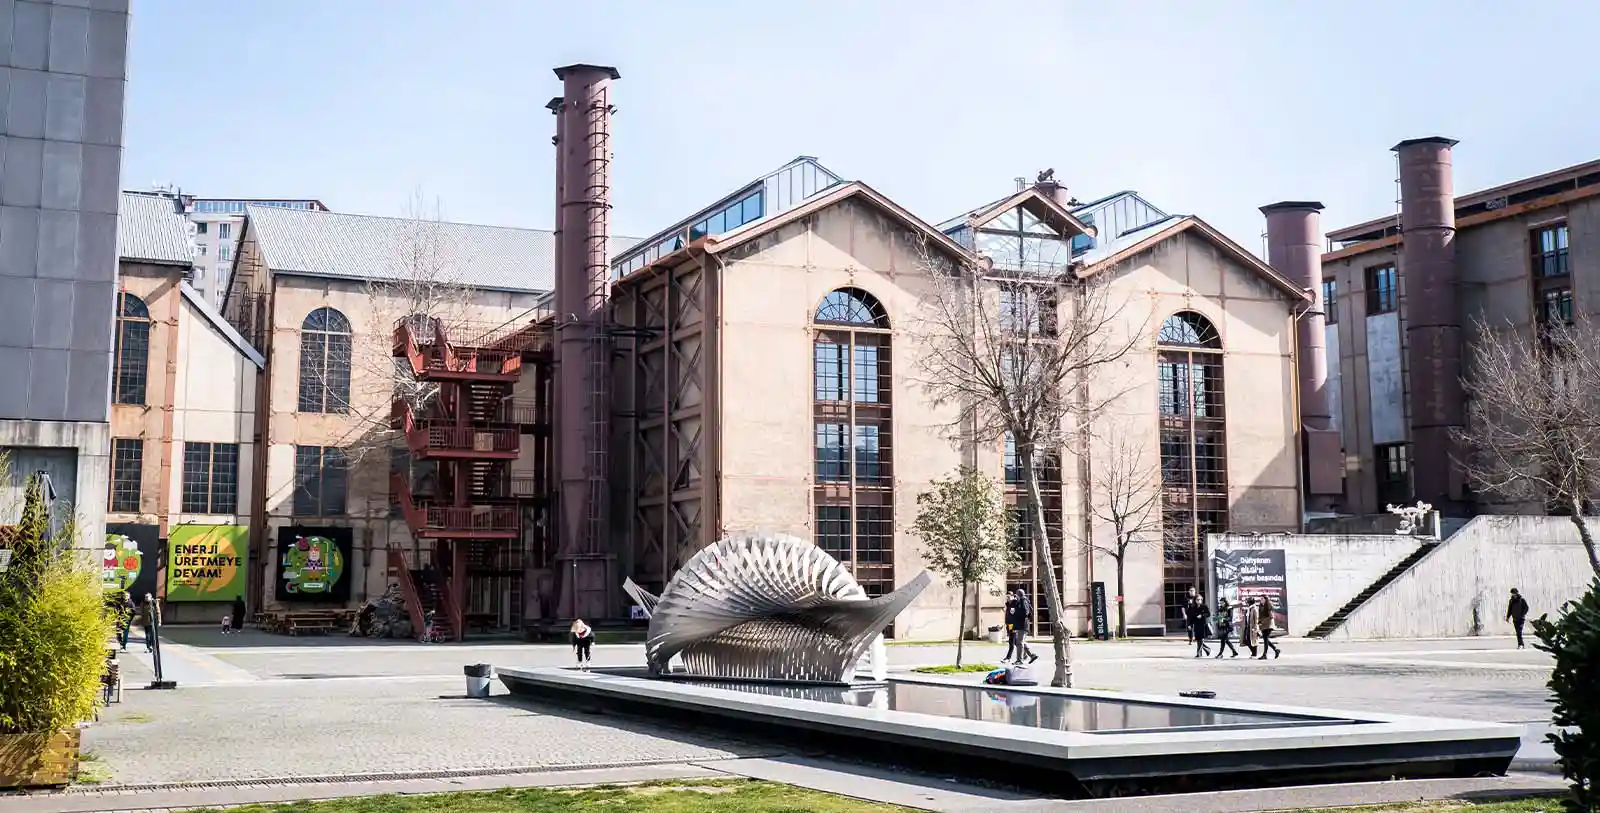 some universities in Istanbul have some spectacular campuses. Bilgi university uses a historical industrial site as its campus